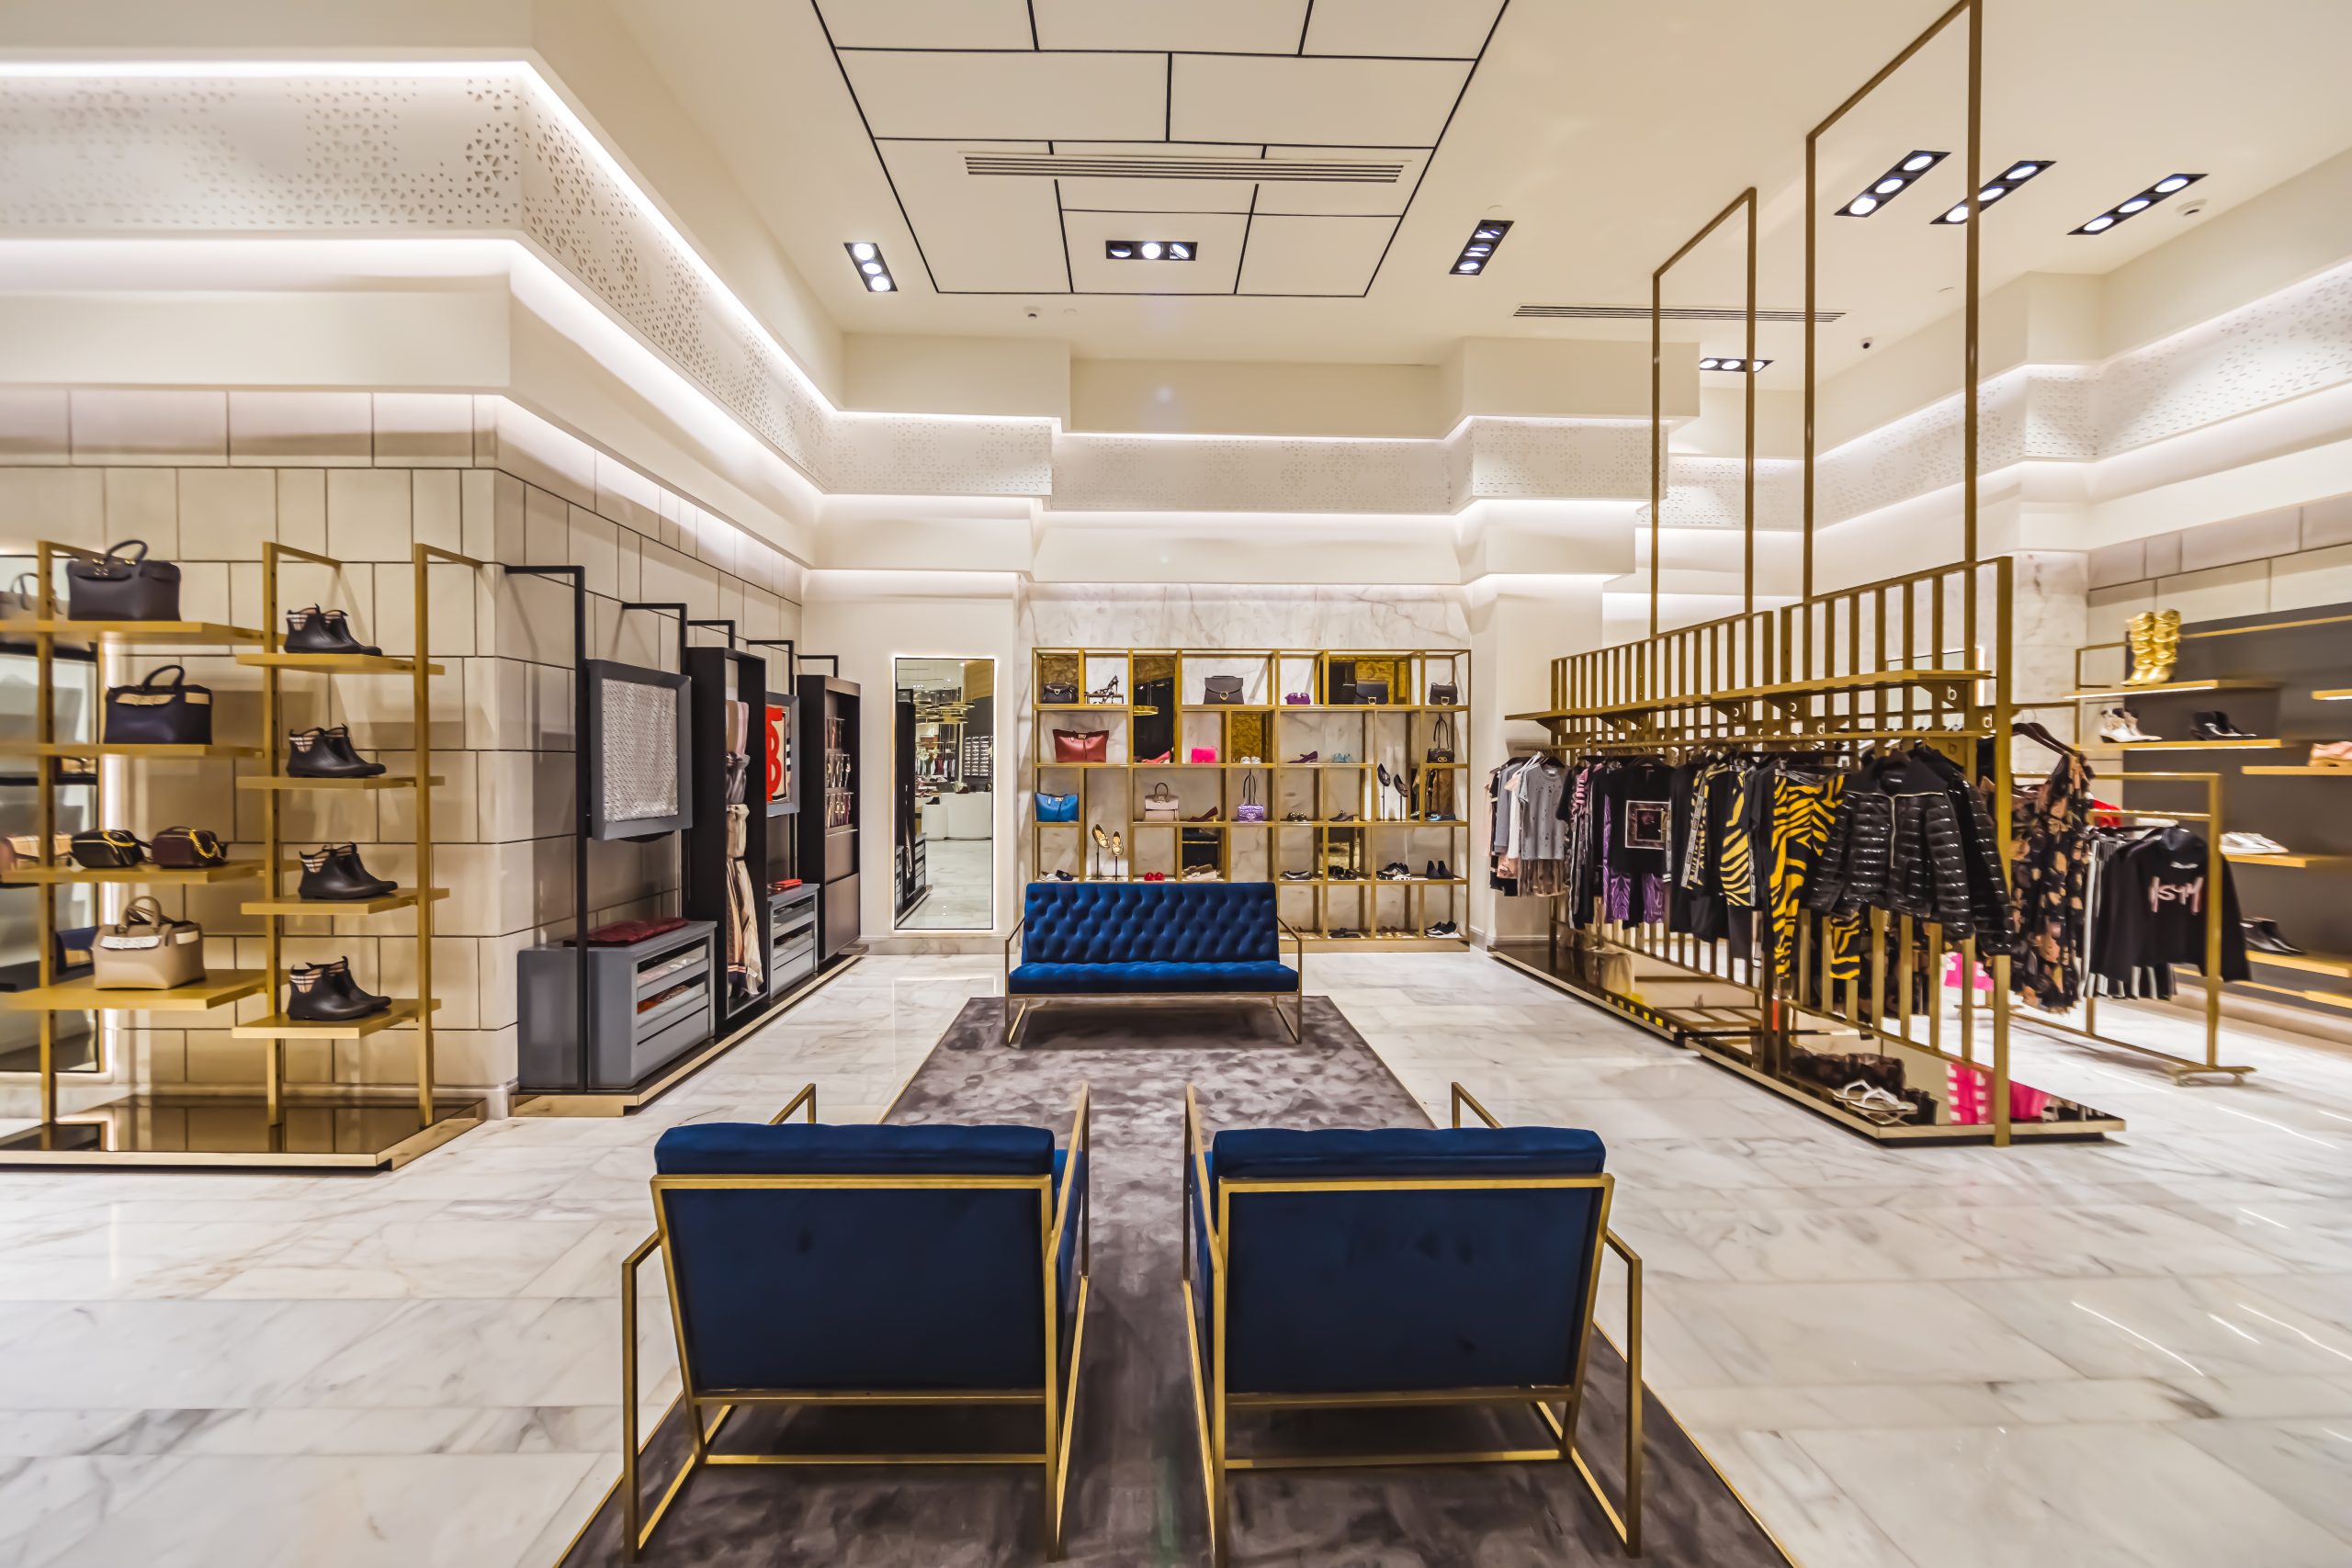 dstore Wins Best Luxury Fashion Department Store in Egypt